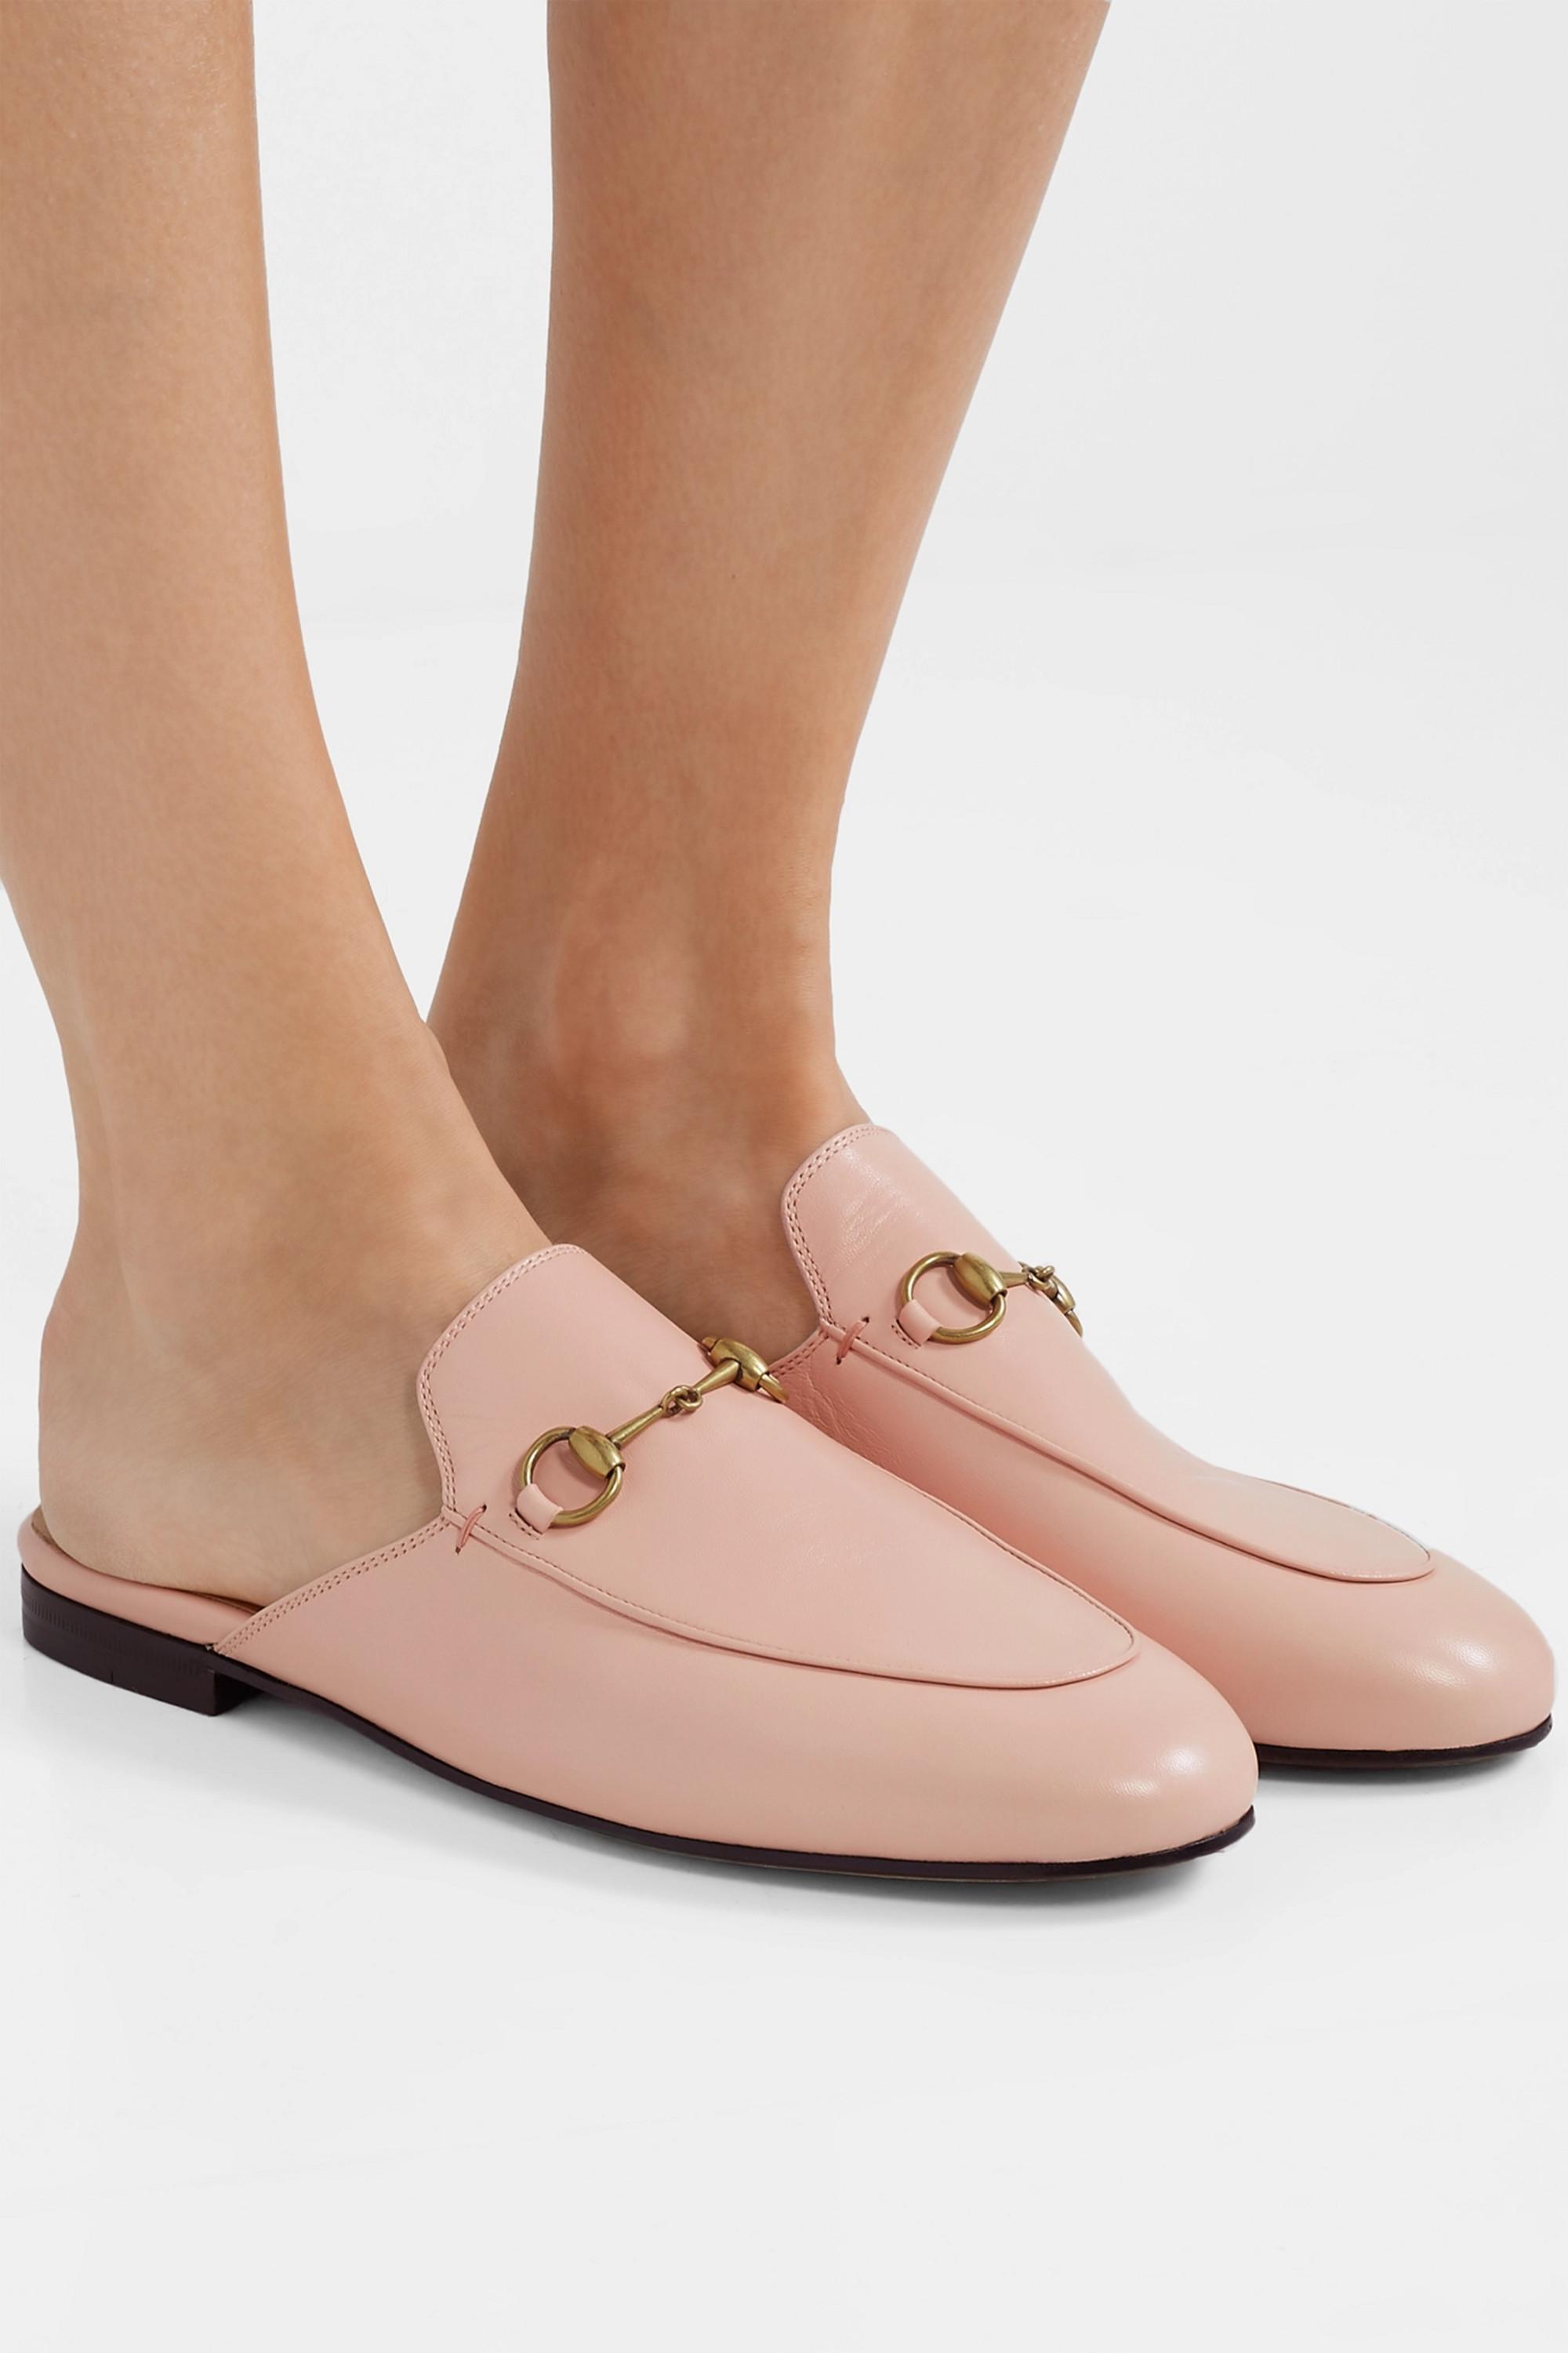 Gucci Leather Princetown Slippers in Blush (Pink) - Lyst